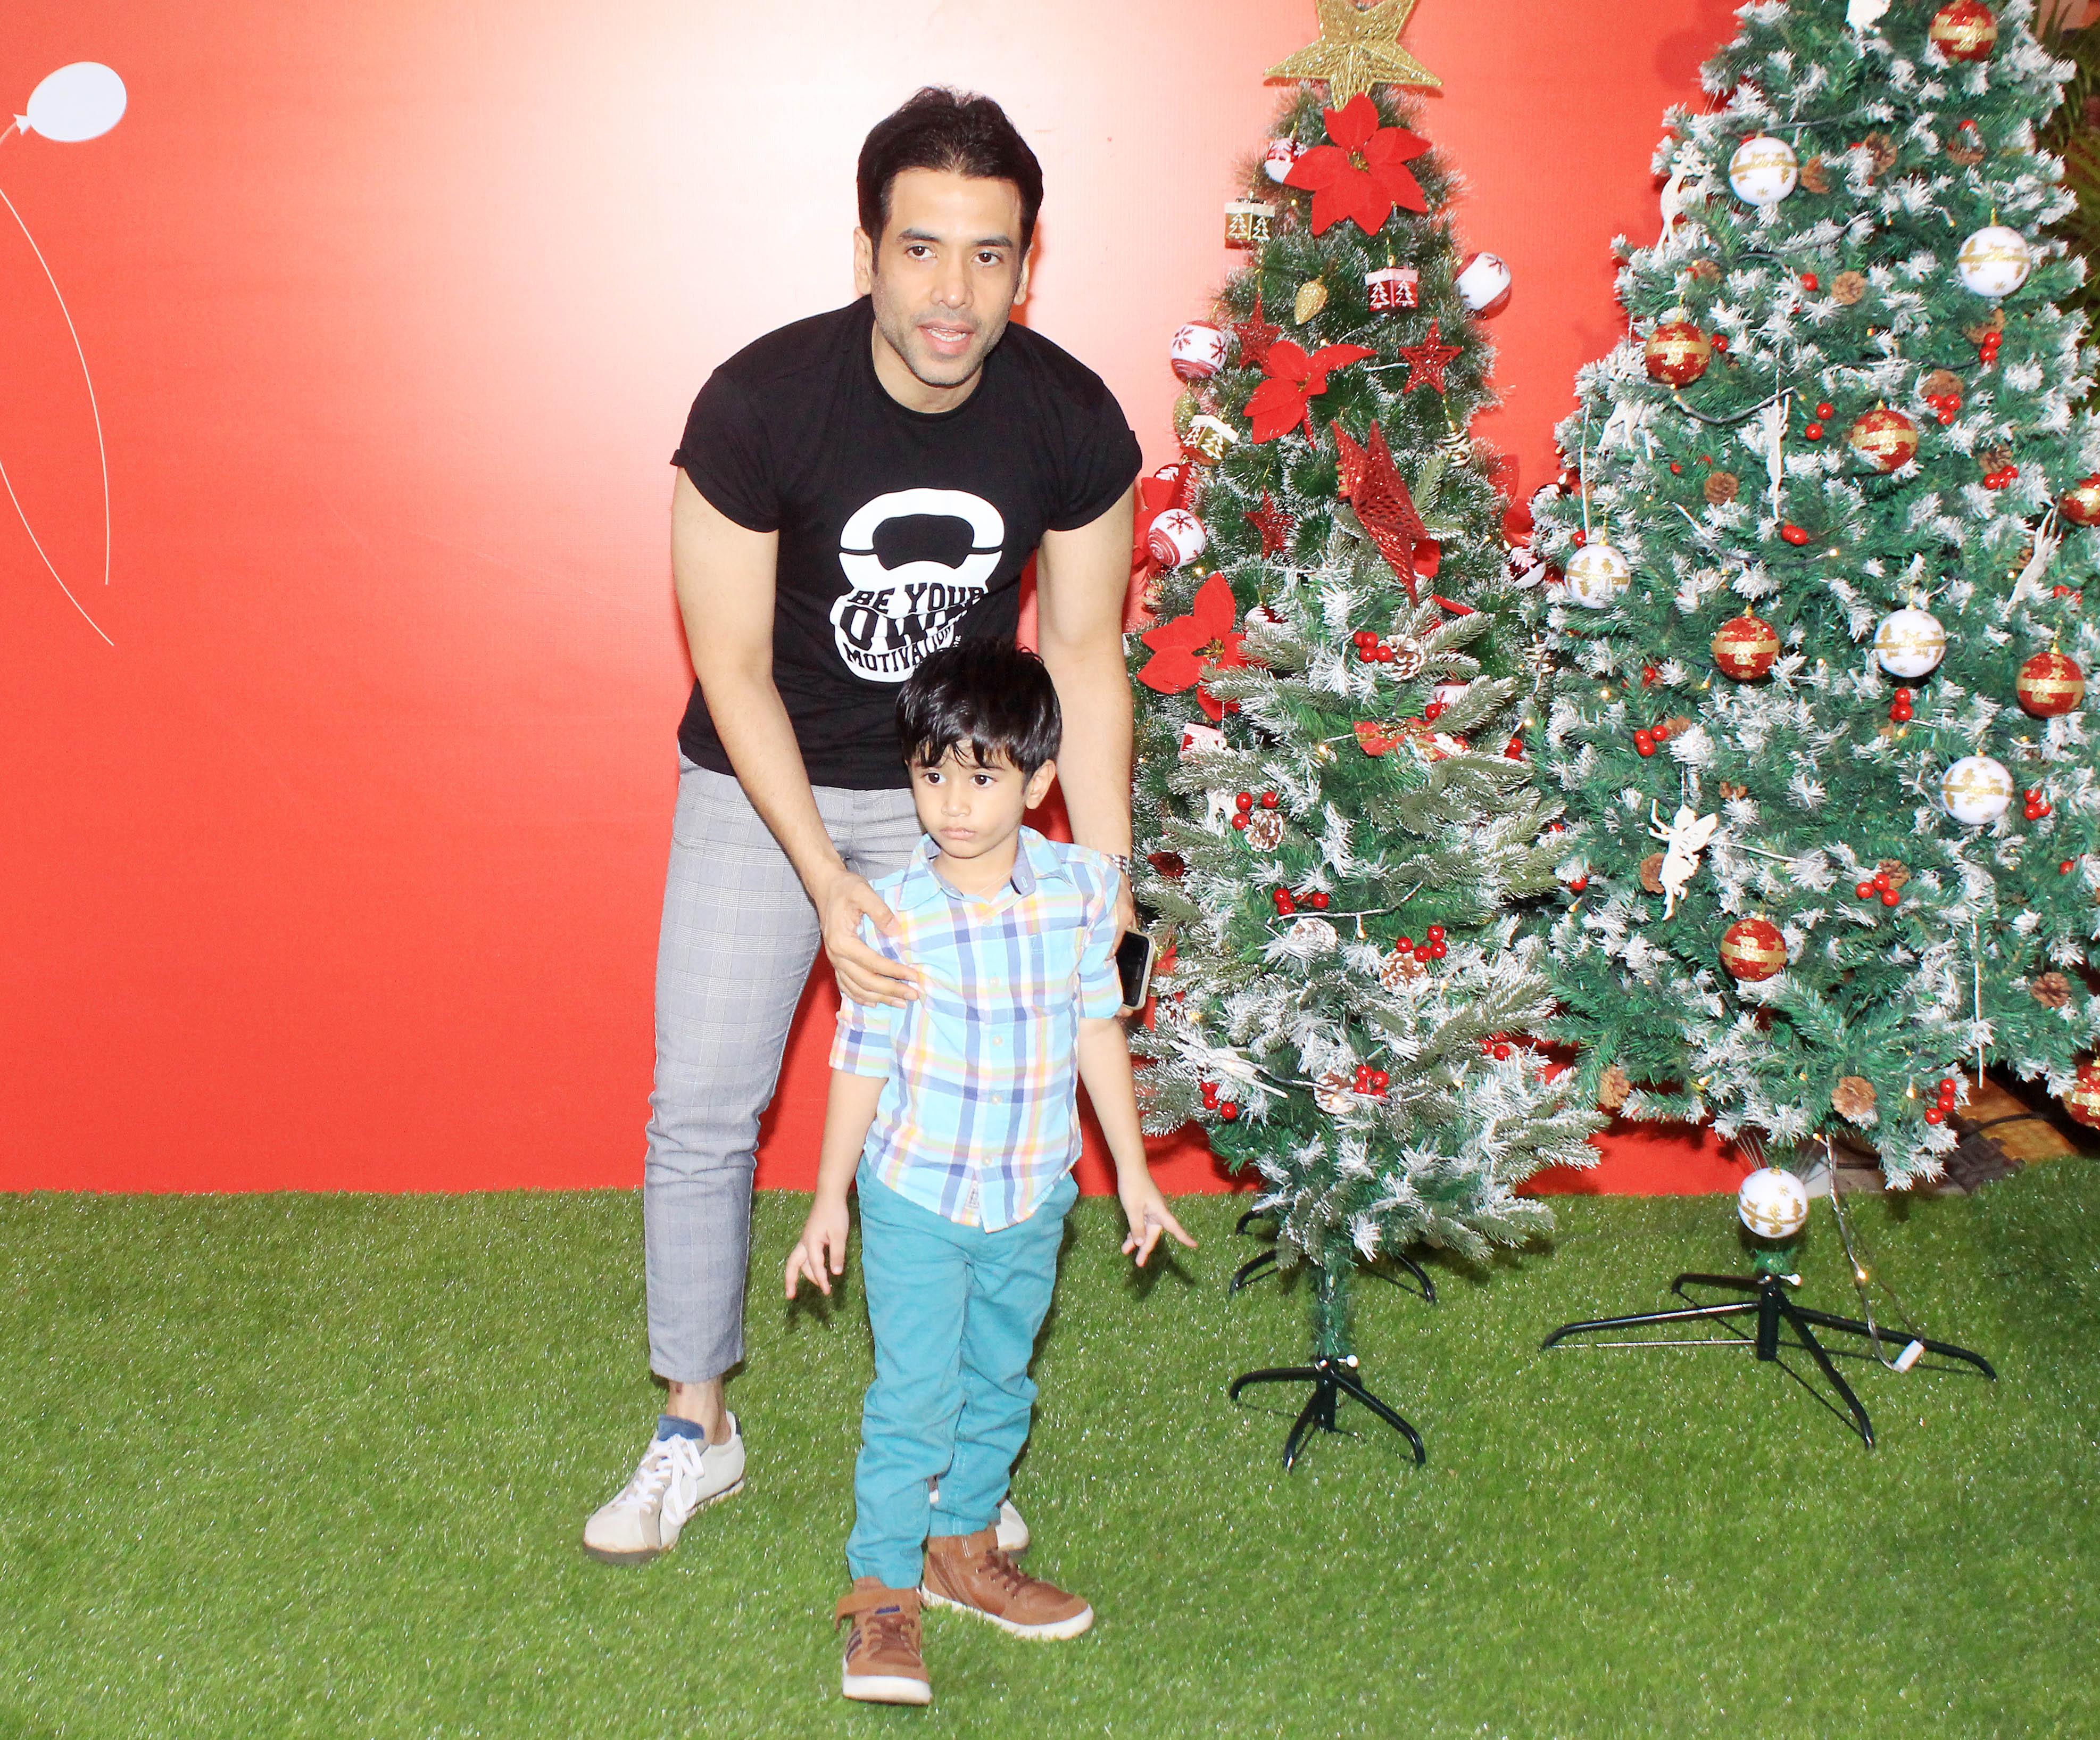 Bollywood actor Tusshar Kapoor walked in with his son Laksshya for the red carpet premiere night